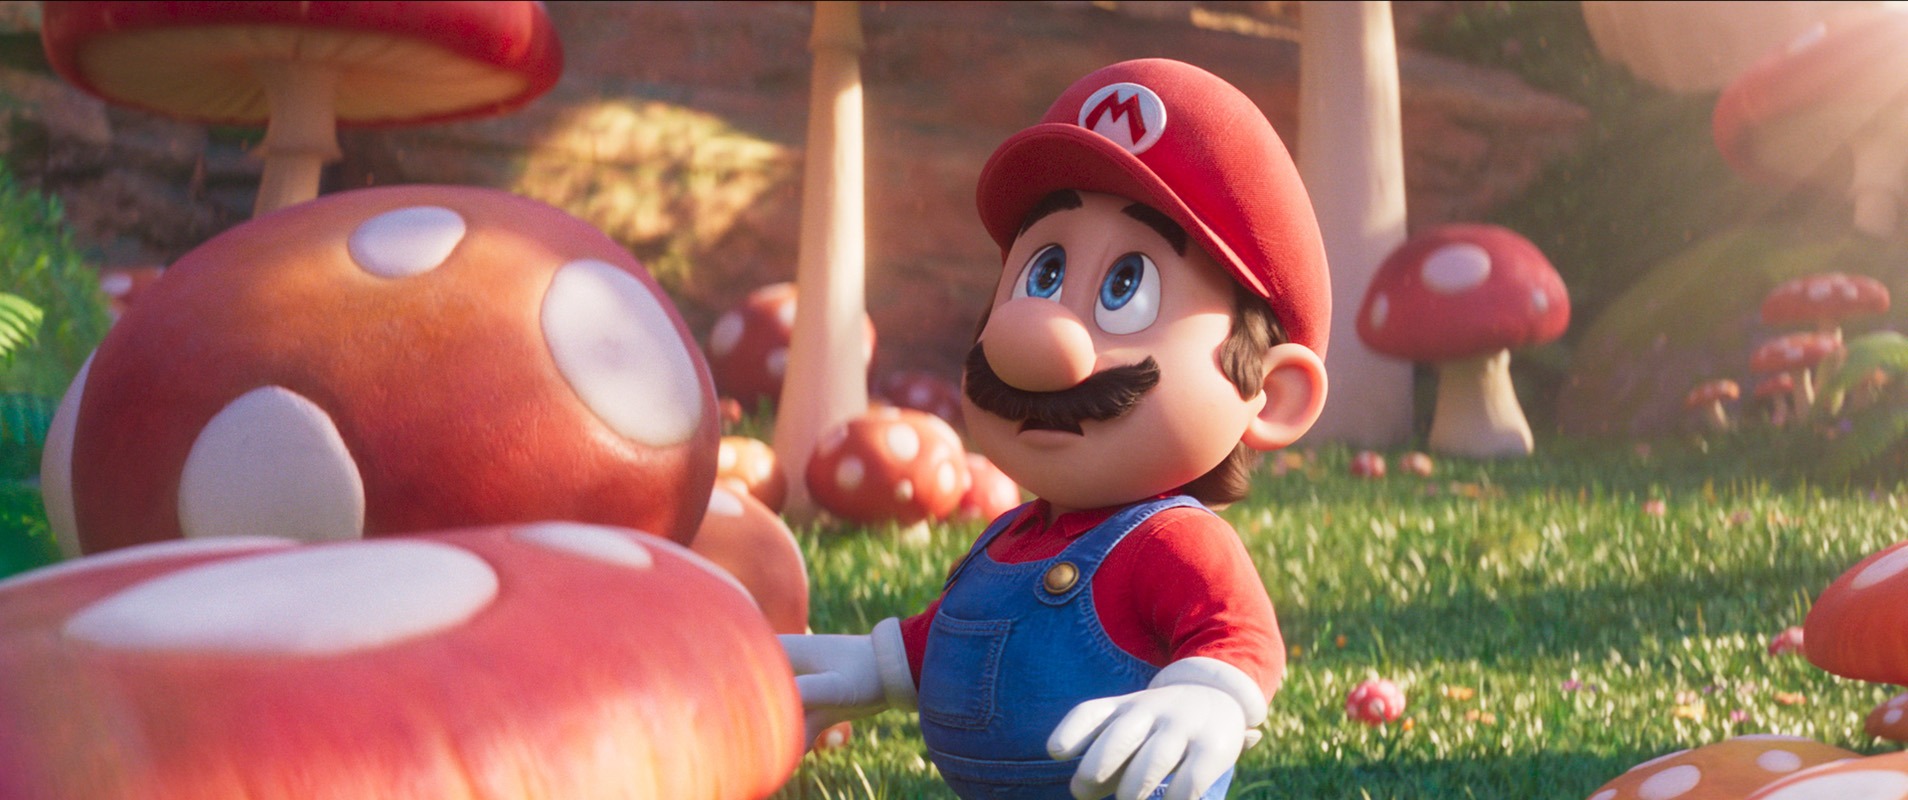 The Super Mario Bros. Movie Beats The Incredibles 2 to Be 3rd Highest-Grossing Animated Film of All Time